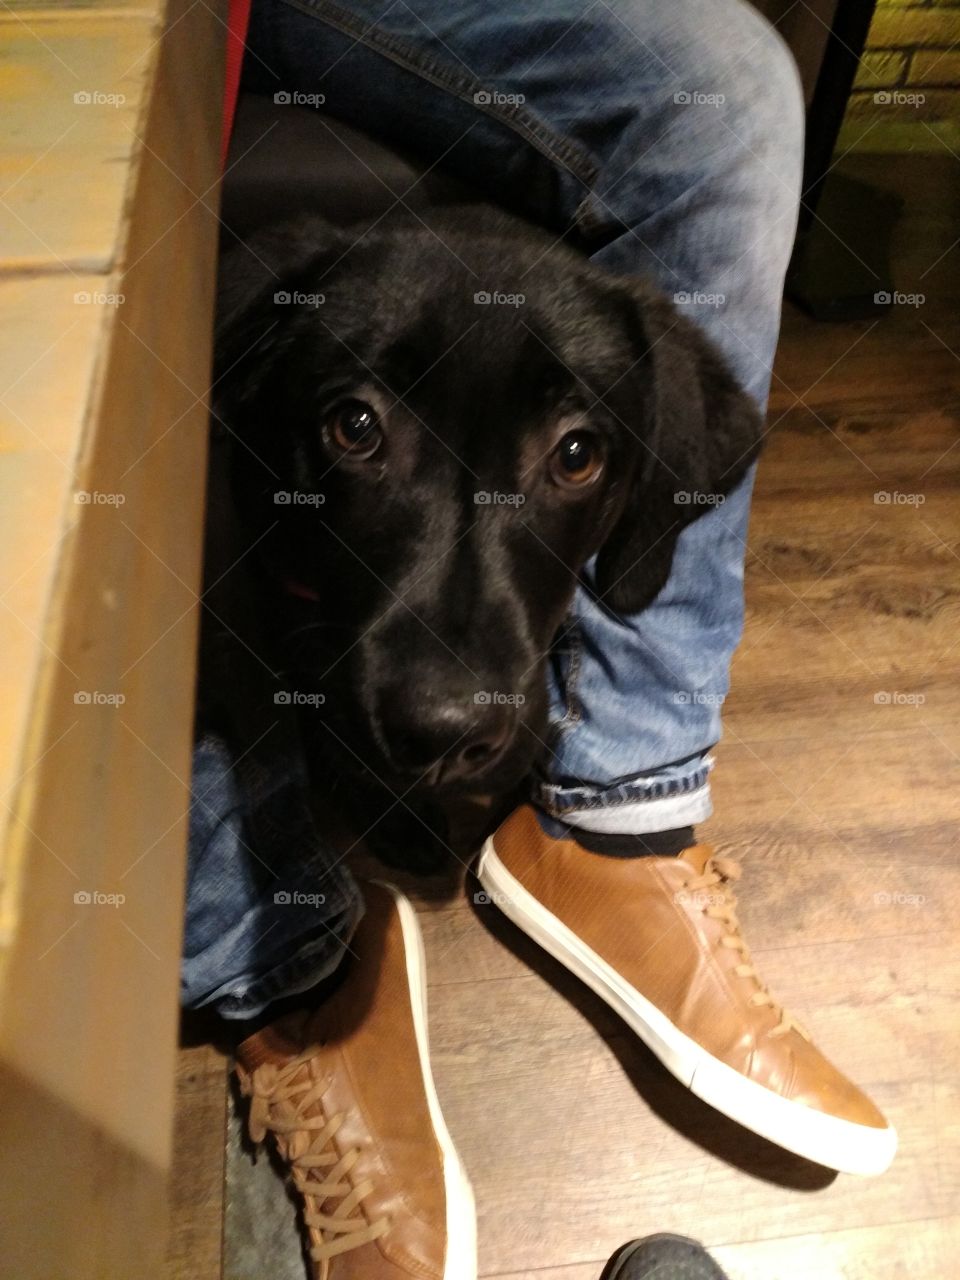 Black labrador puppy with cute brown eyes hiding in its owners legs showing affection for what it is shown